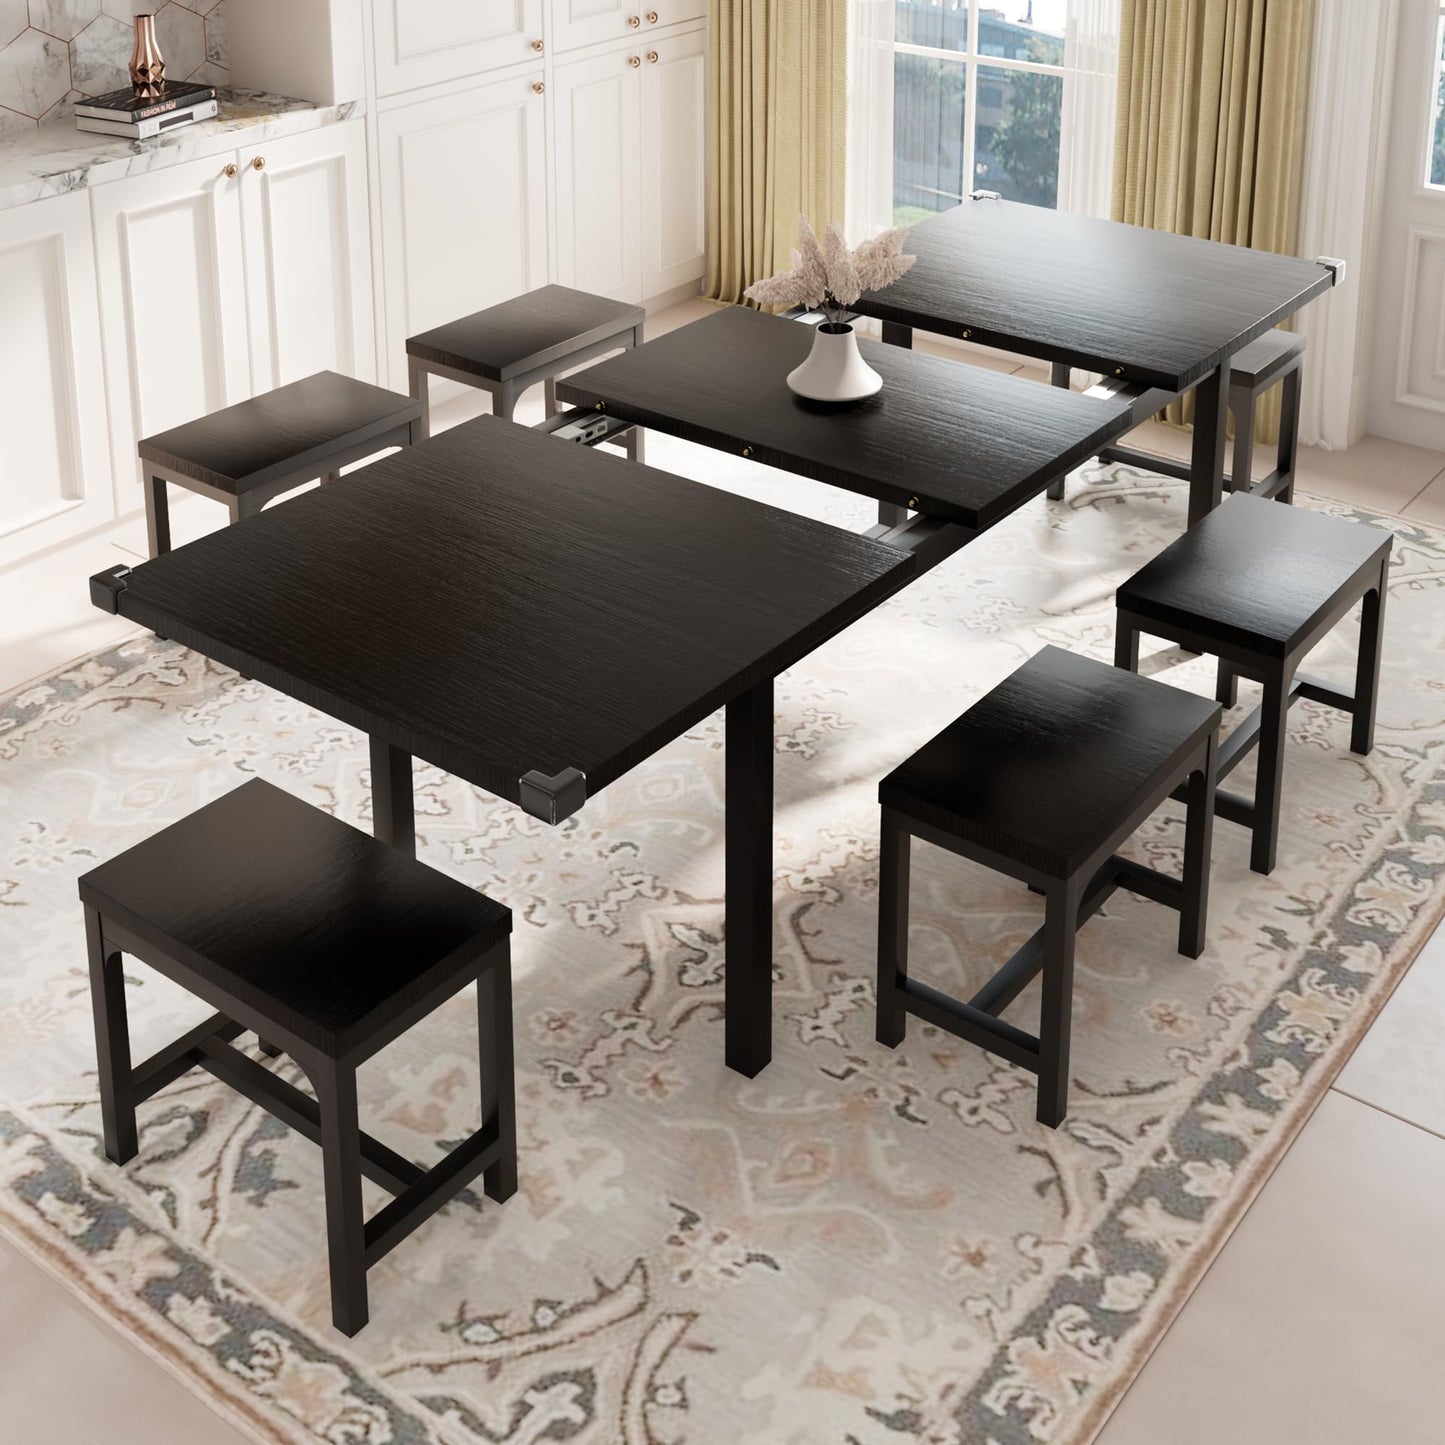 Feonase 7-Piece Dining Table Set with 6 Stools, 63" Large Extendable Kitchen Table Set for 4-8, Mid-Century Dining Room Table with Heavy-Duty Frame, Easy Assembly, Black